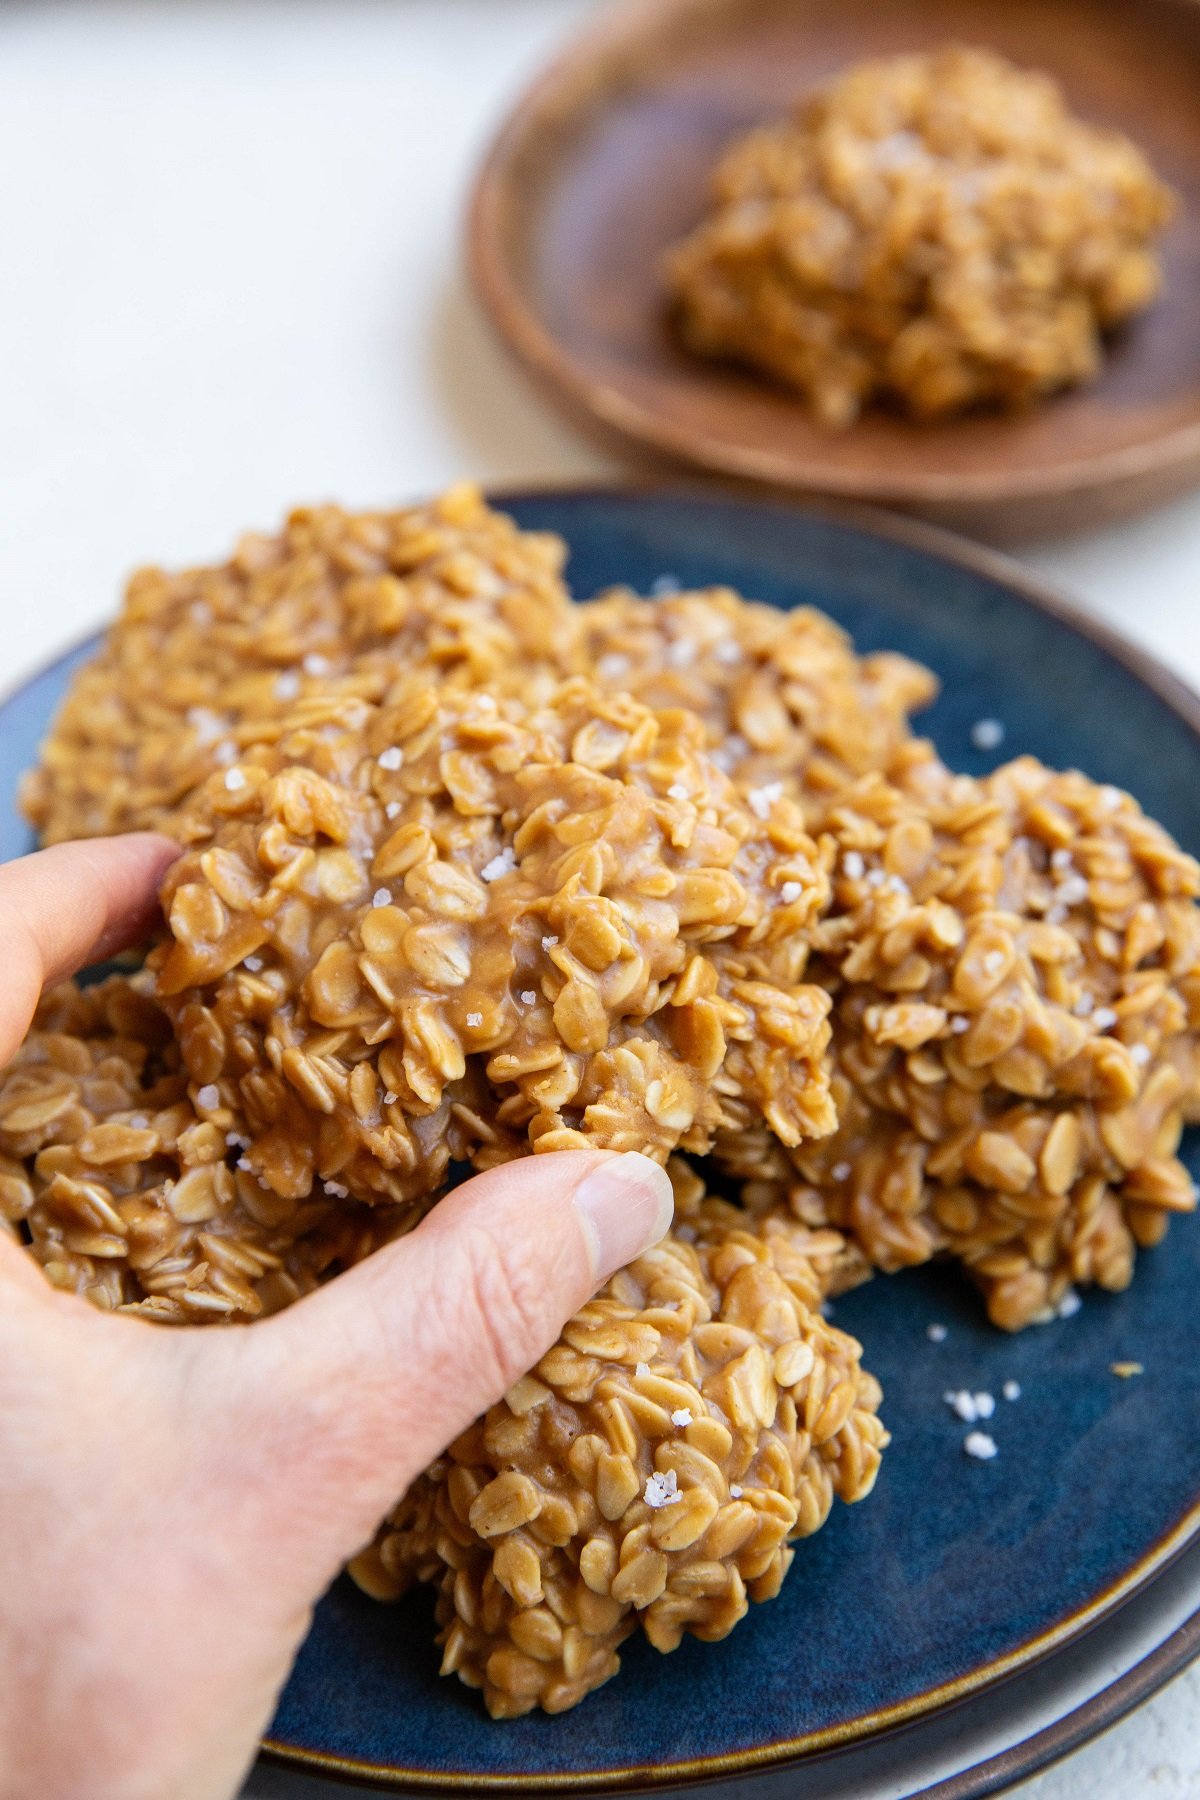 Hand grabbing a peanut butter oatmeal cookie off of a plate.